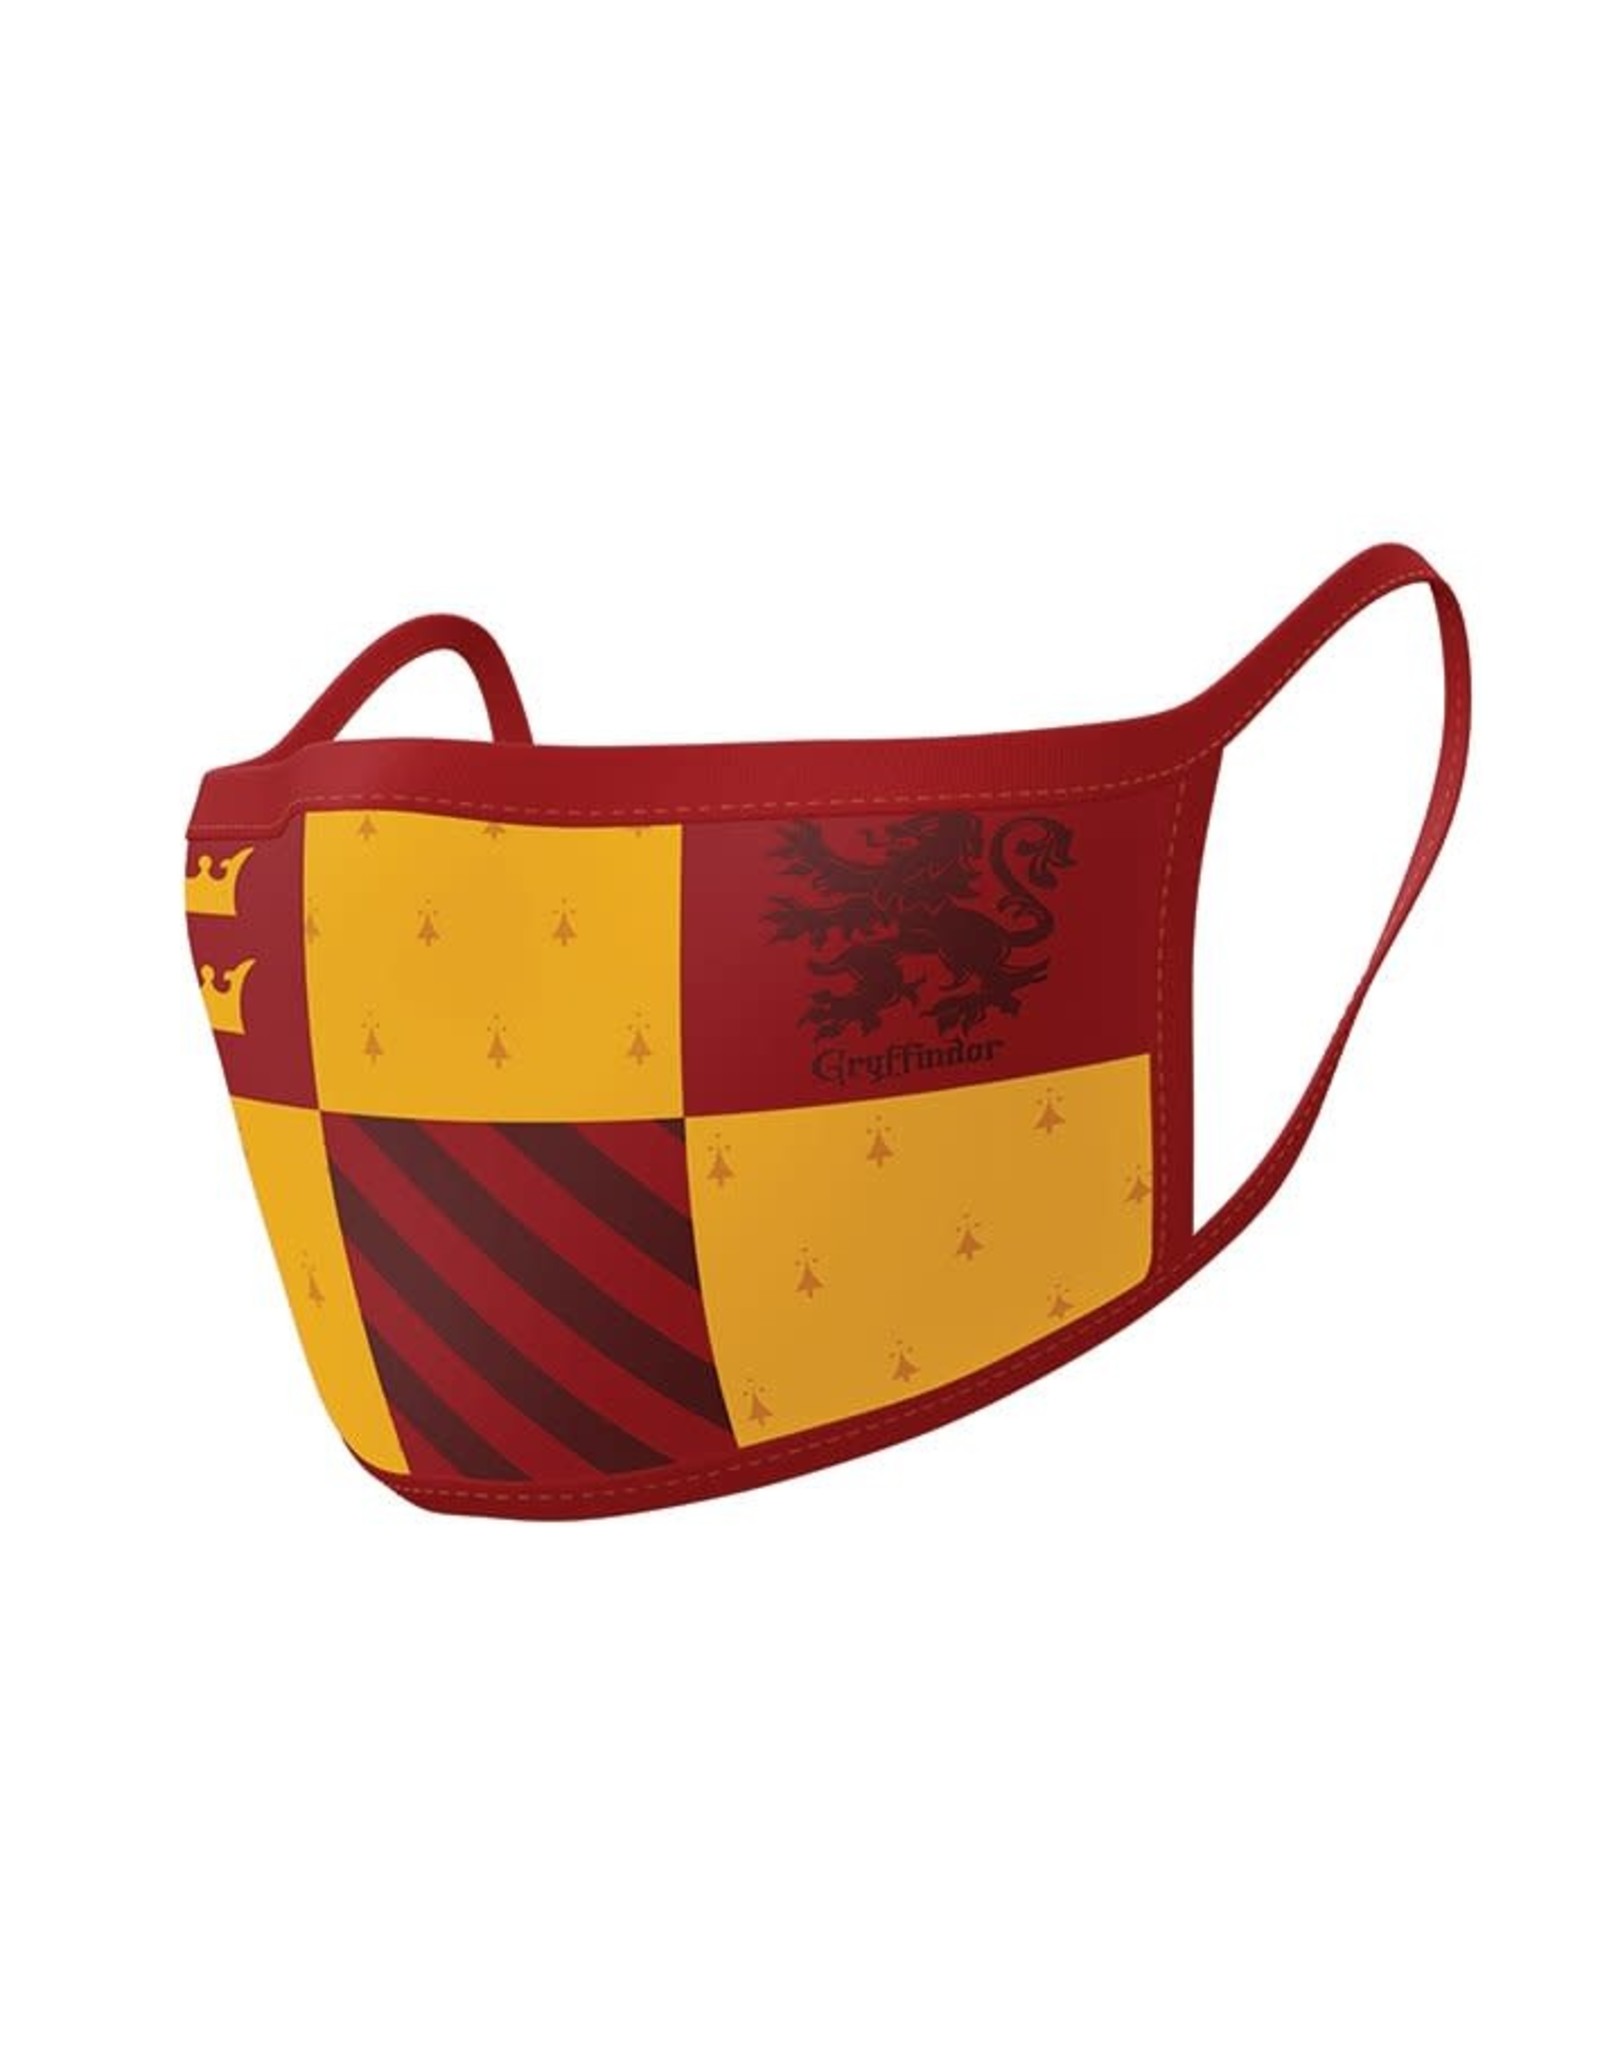 HARRY POTTER Premium Face Mask Covers pack of 2 - Gryffindor